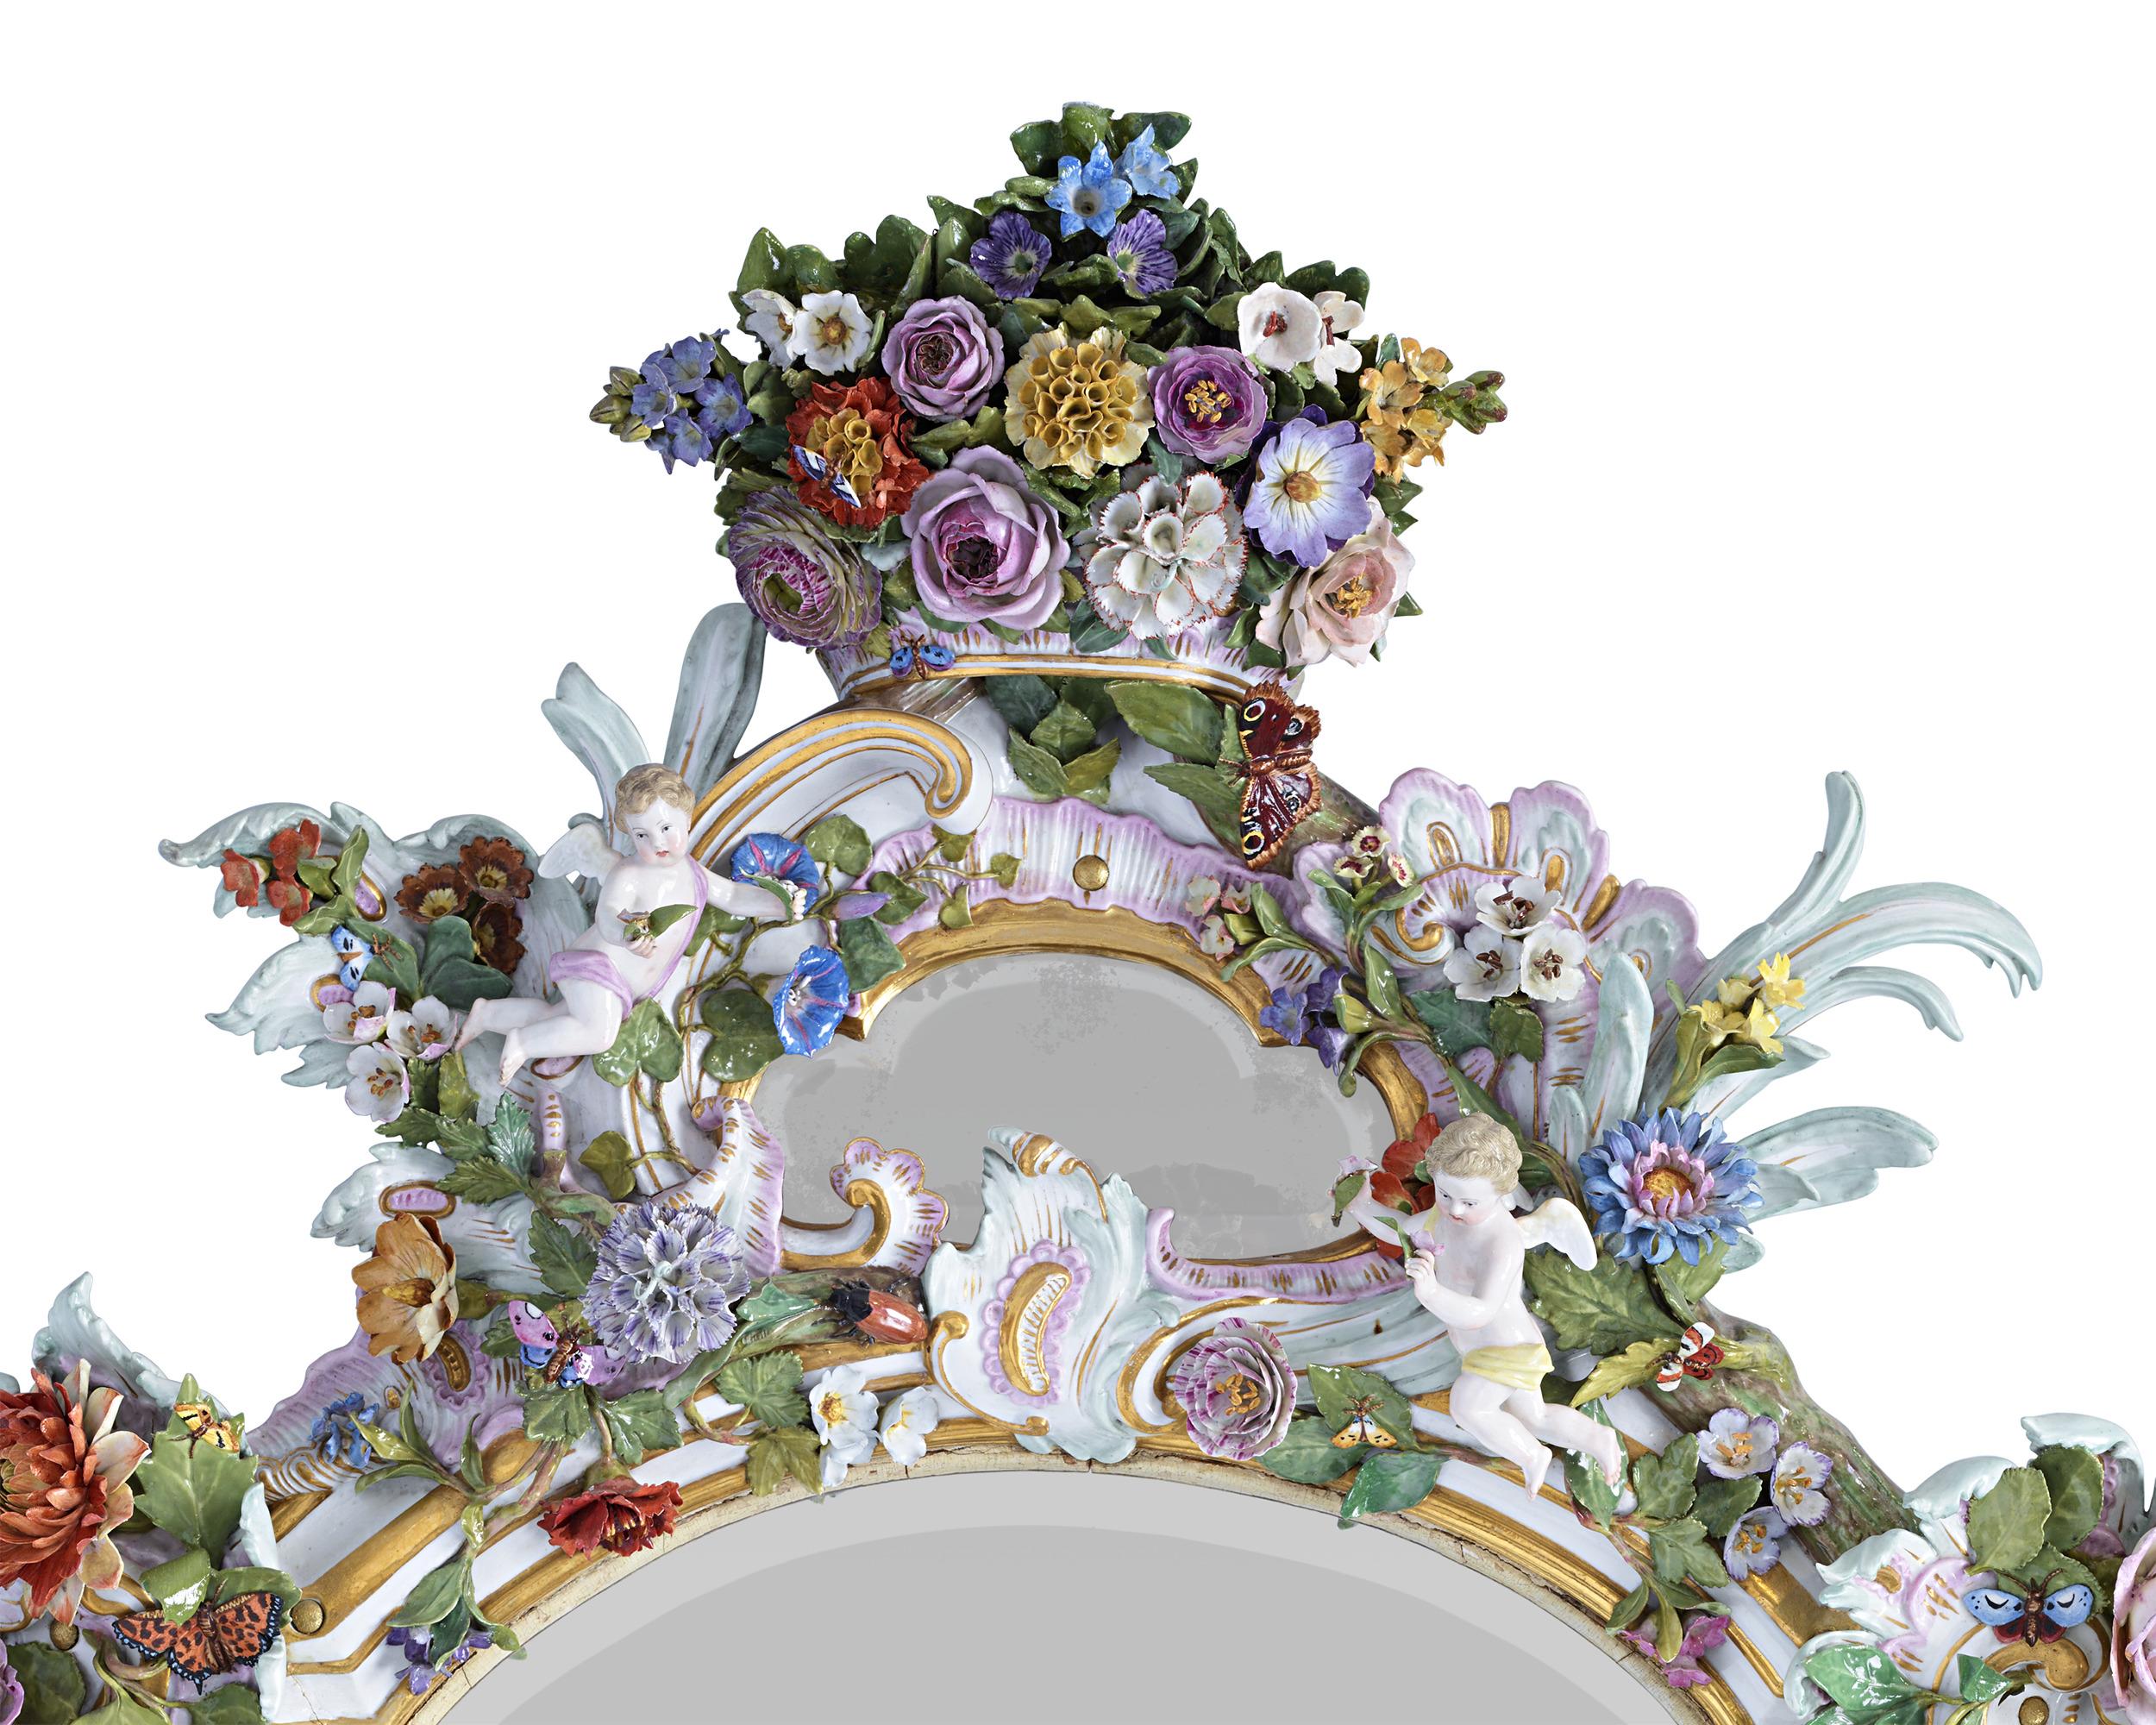 Lavish Meissen porcelain serves as the extraordinary frame for this mirror. Exquisitely hand-painted in polychrome with gilt accents, the bountiful frame is adorned with all manner of classic Rococo decoration, including lush bouquets of highly